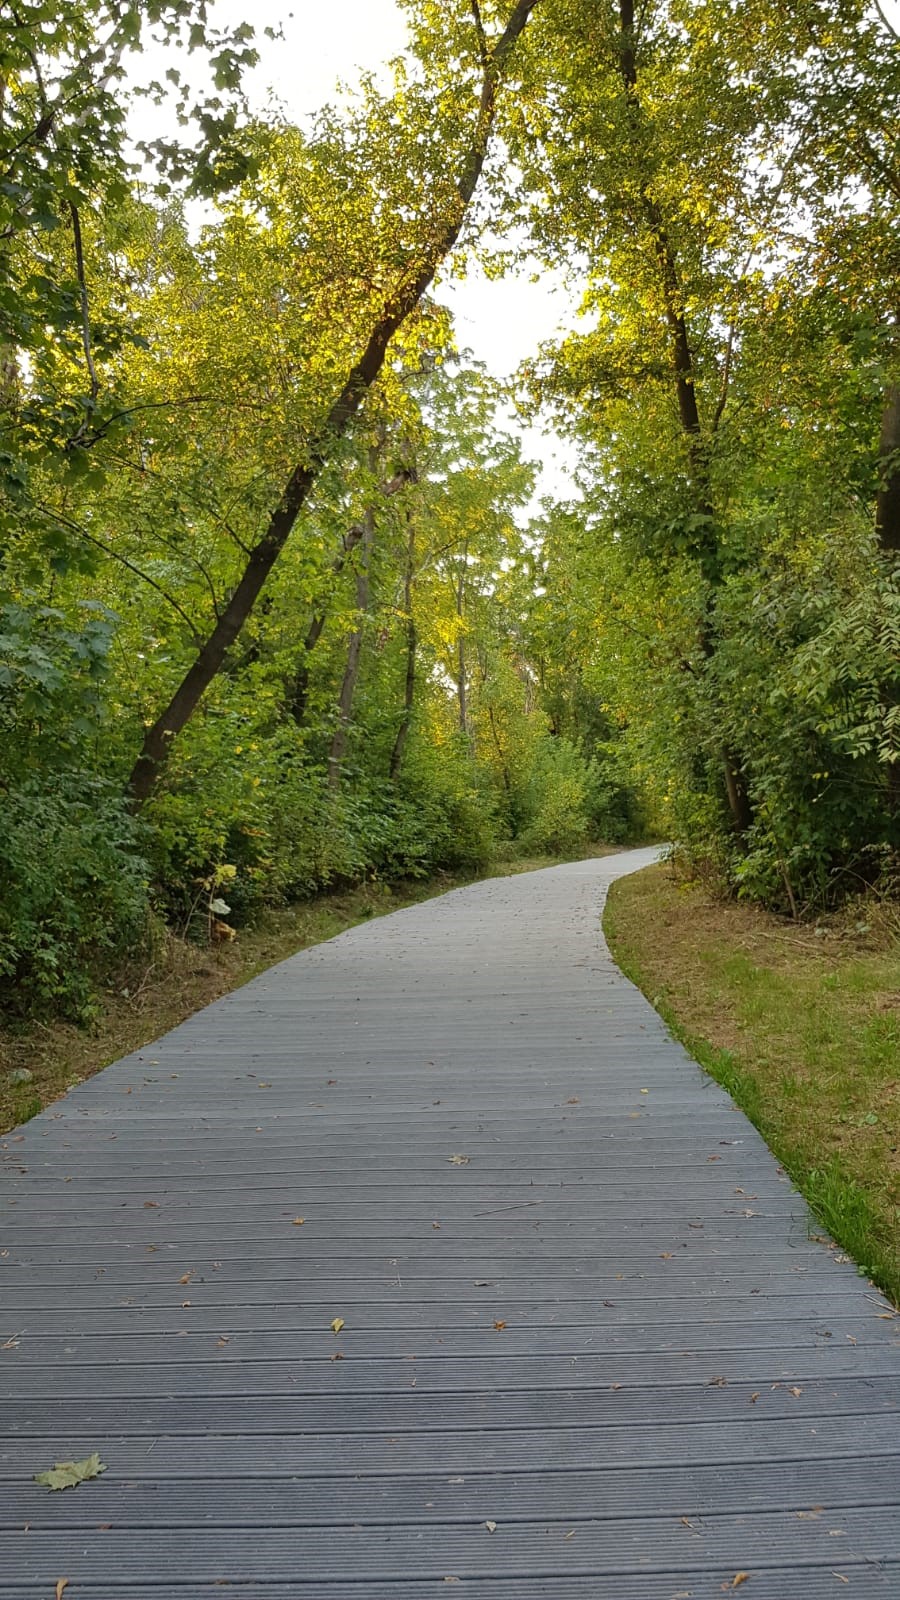 City of Mississauga boardwalk with HAHN commercial footpath planks